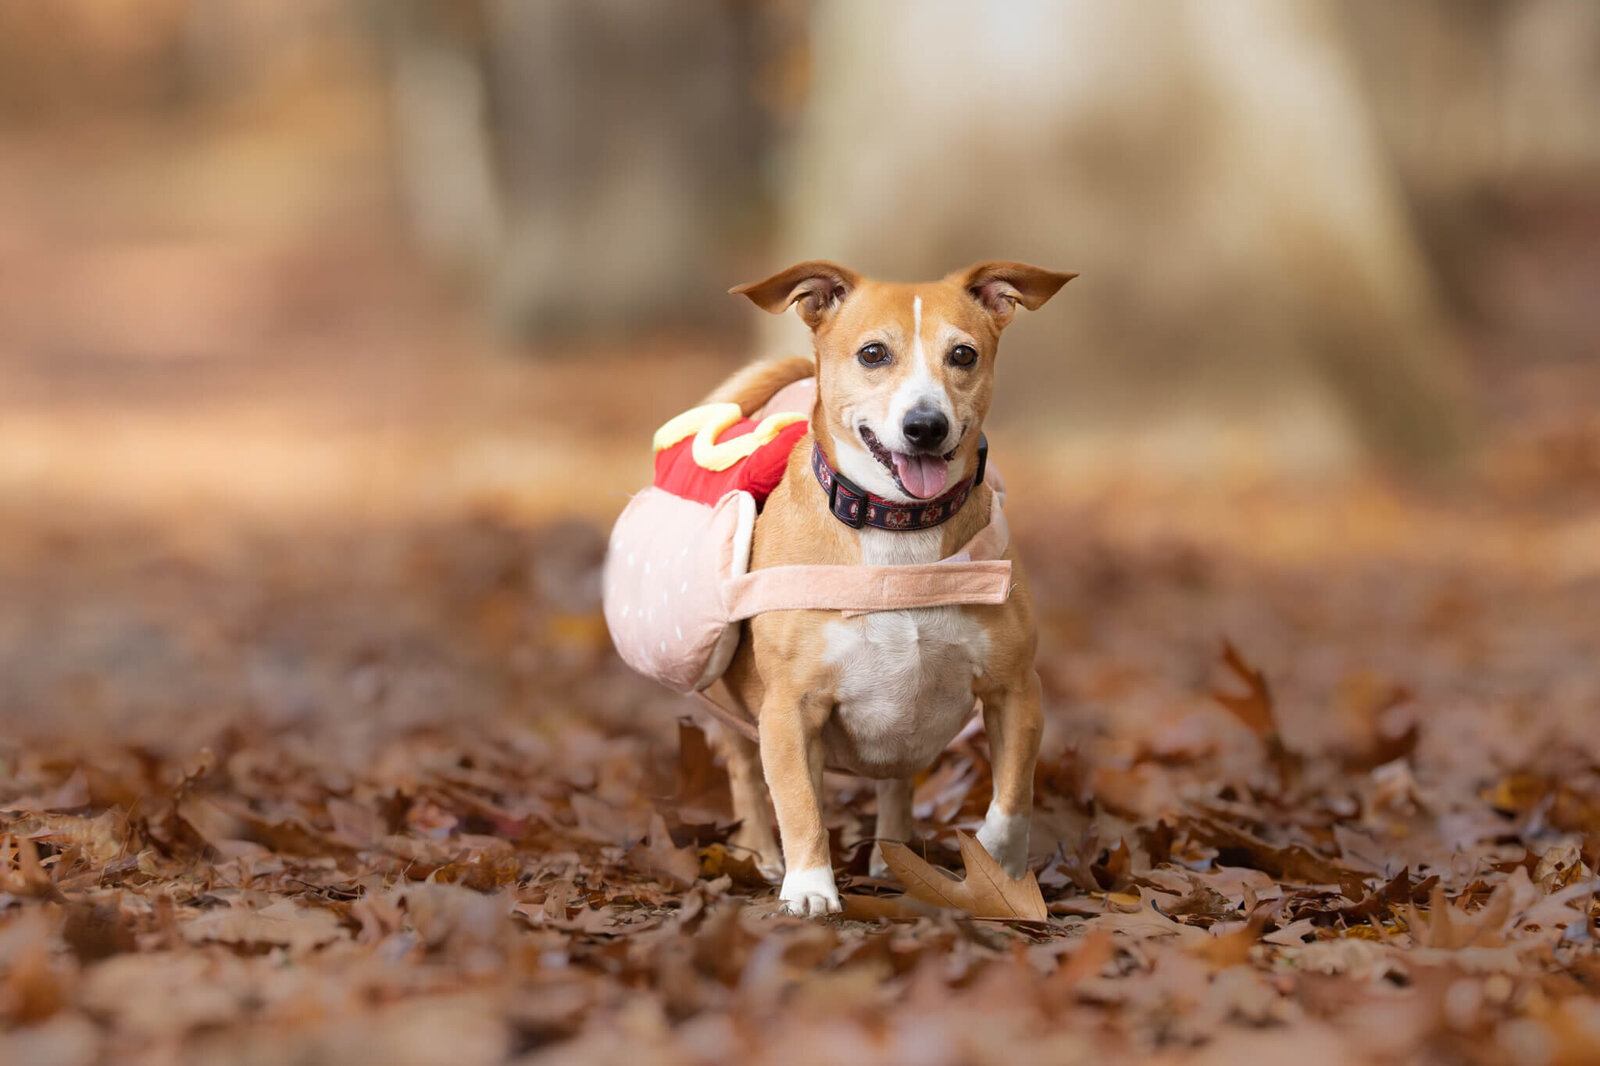 Tan and white mixed breed rescue pup in hotdog Halloween costume in forest